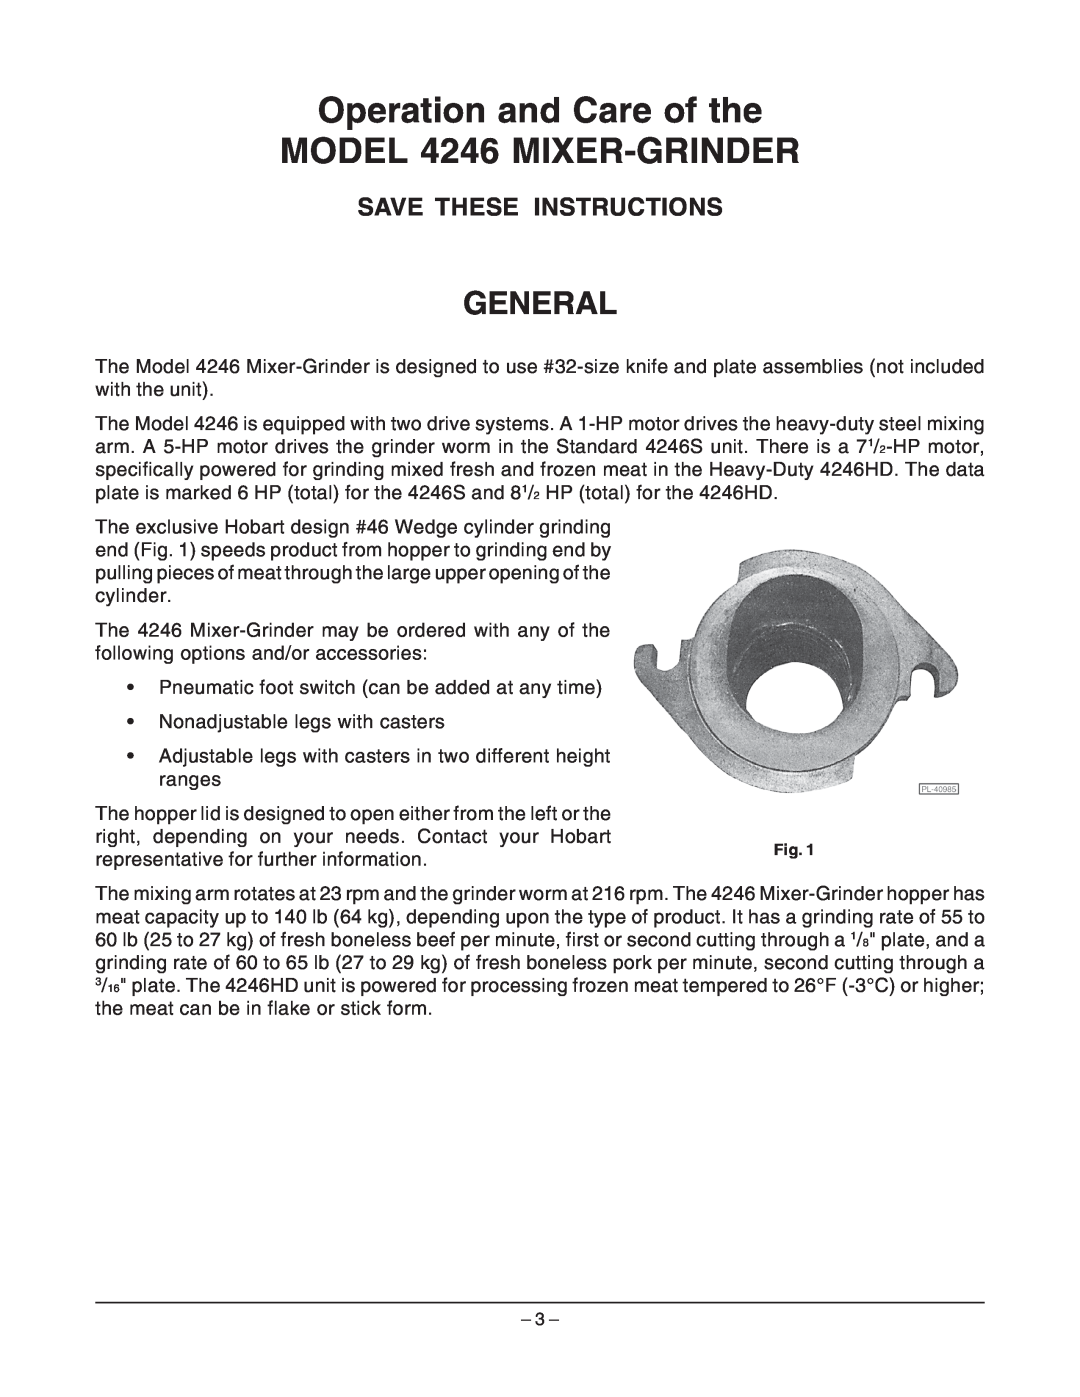 Hobart manual General, Operation and Care of the, MODEL 4246 MIXER-GRINDER, Save These Instructions 